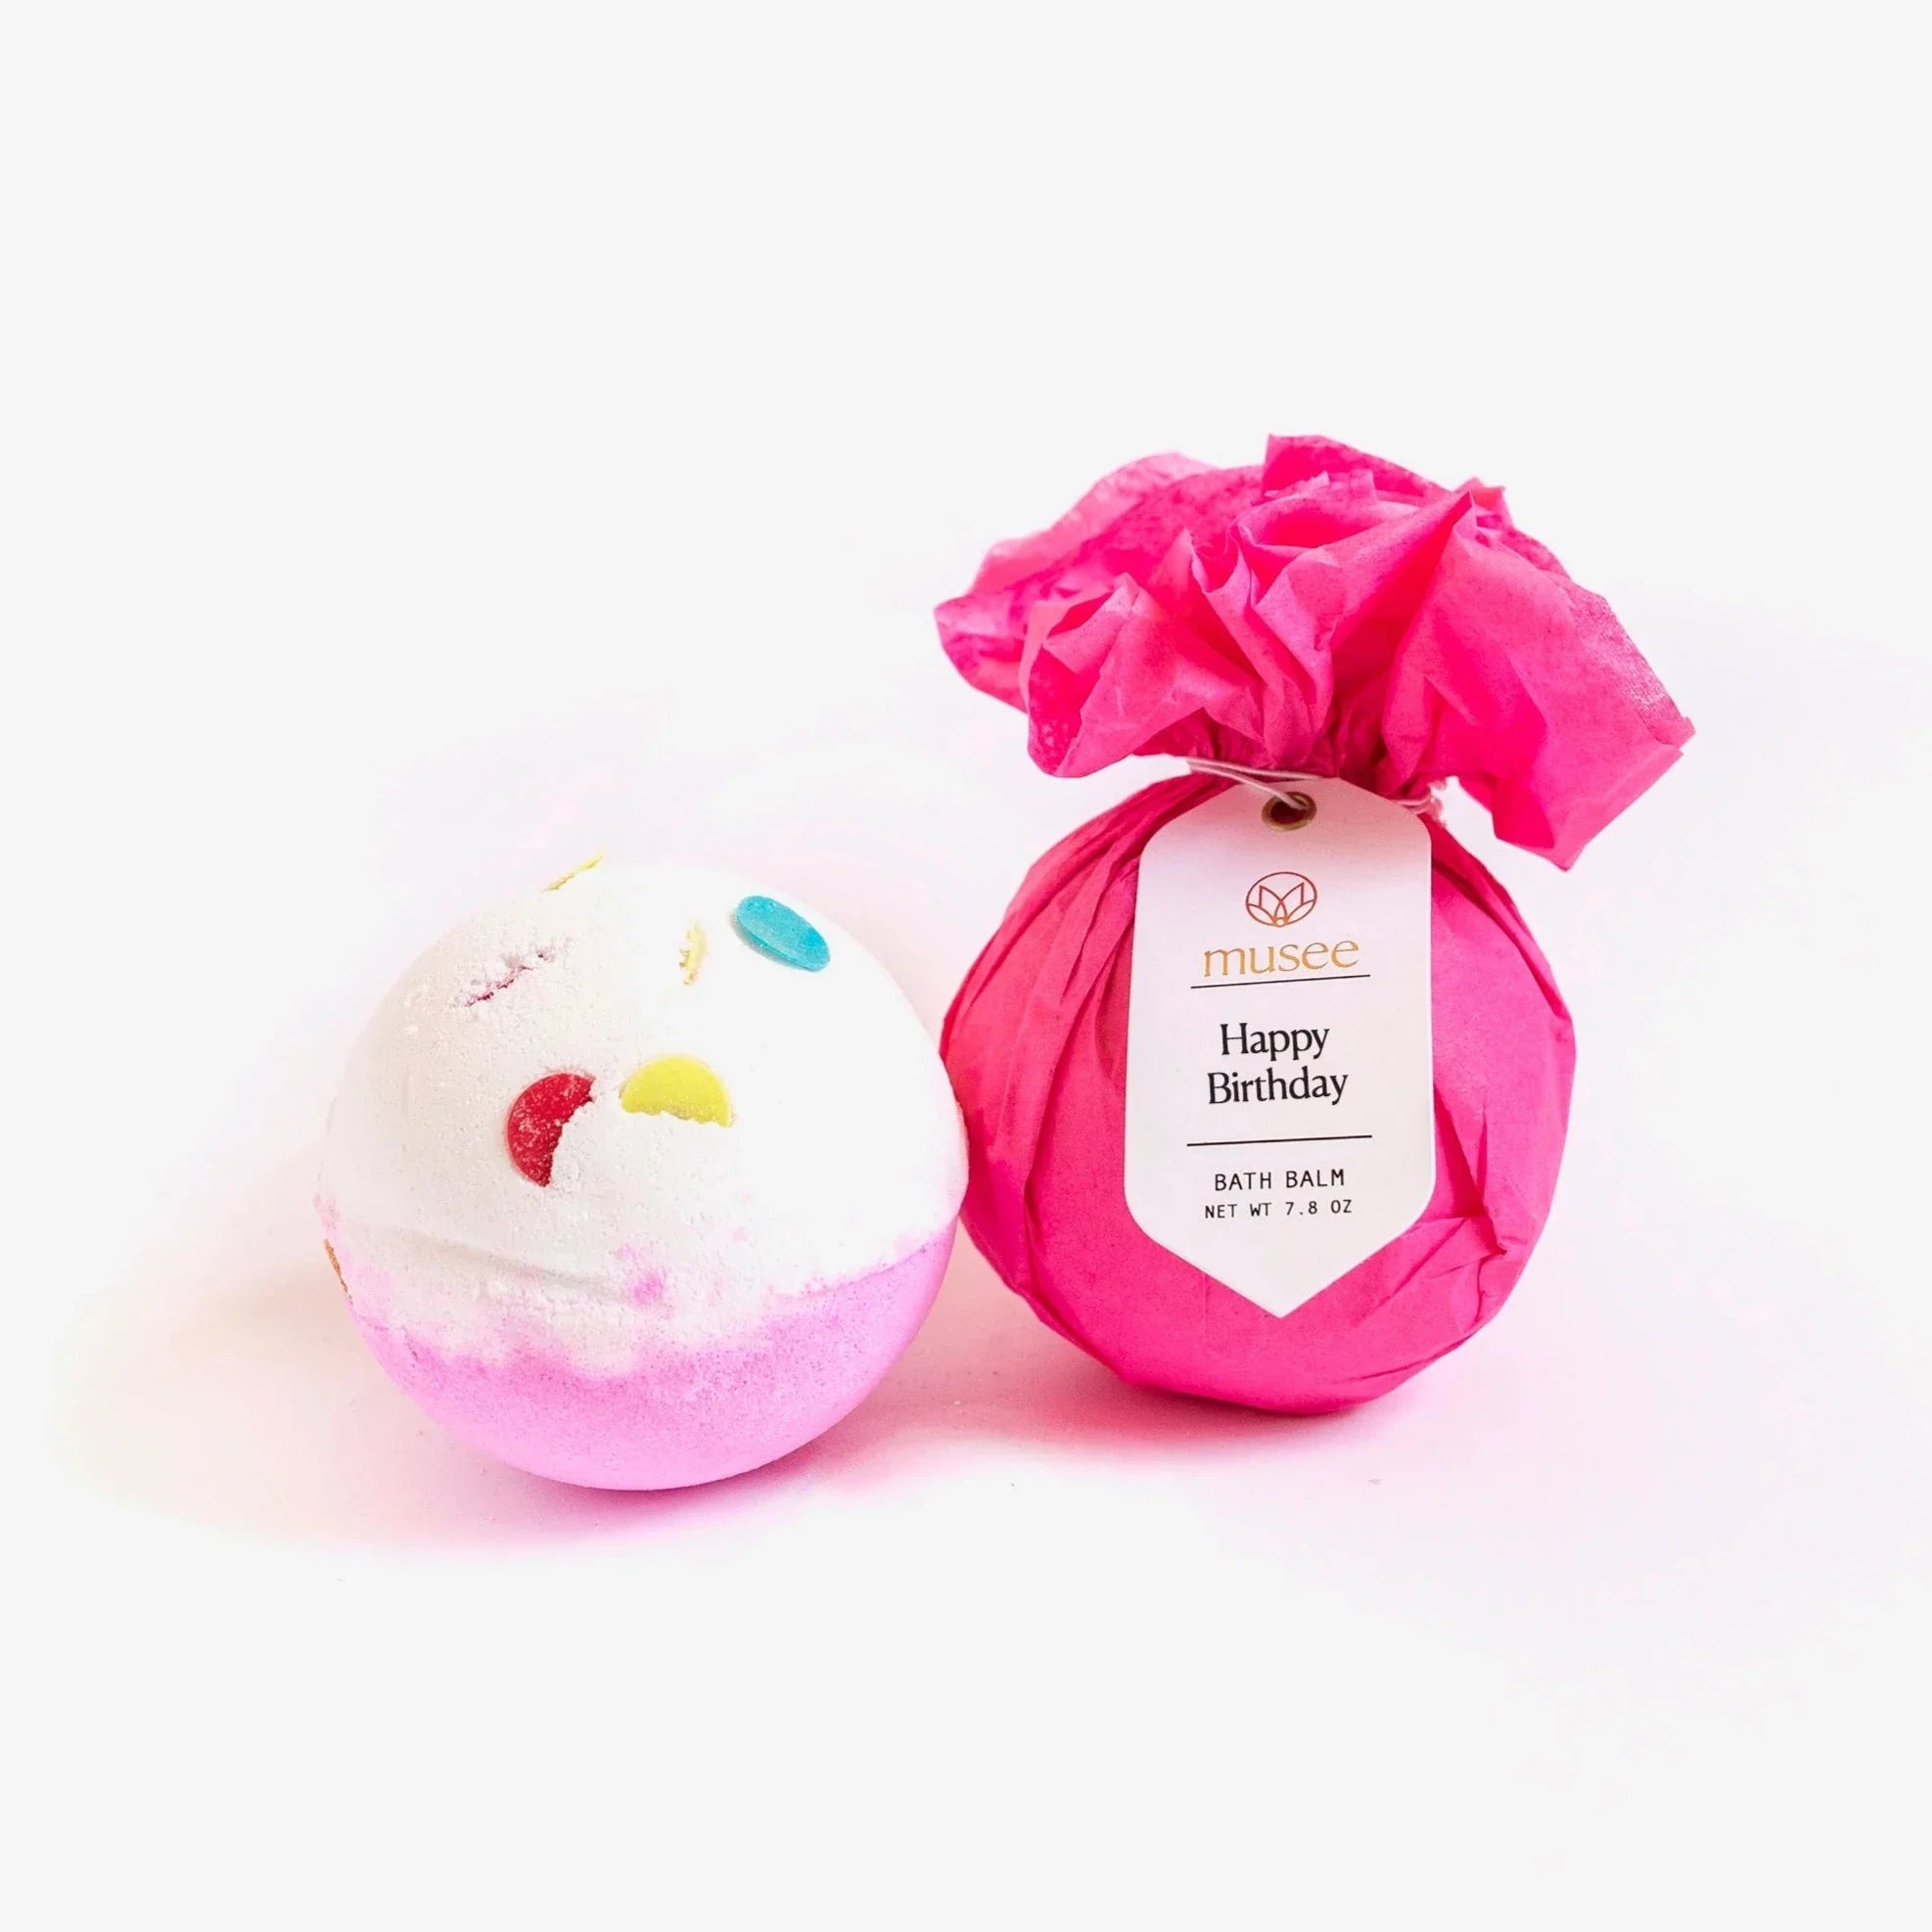 happy birthday bath bomb where the top half is white with confetti and the bottom half is pink. next to it is a wrapped bath bomb in pink tissue paper